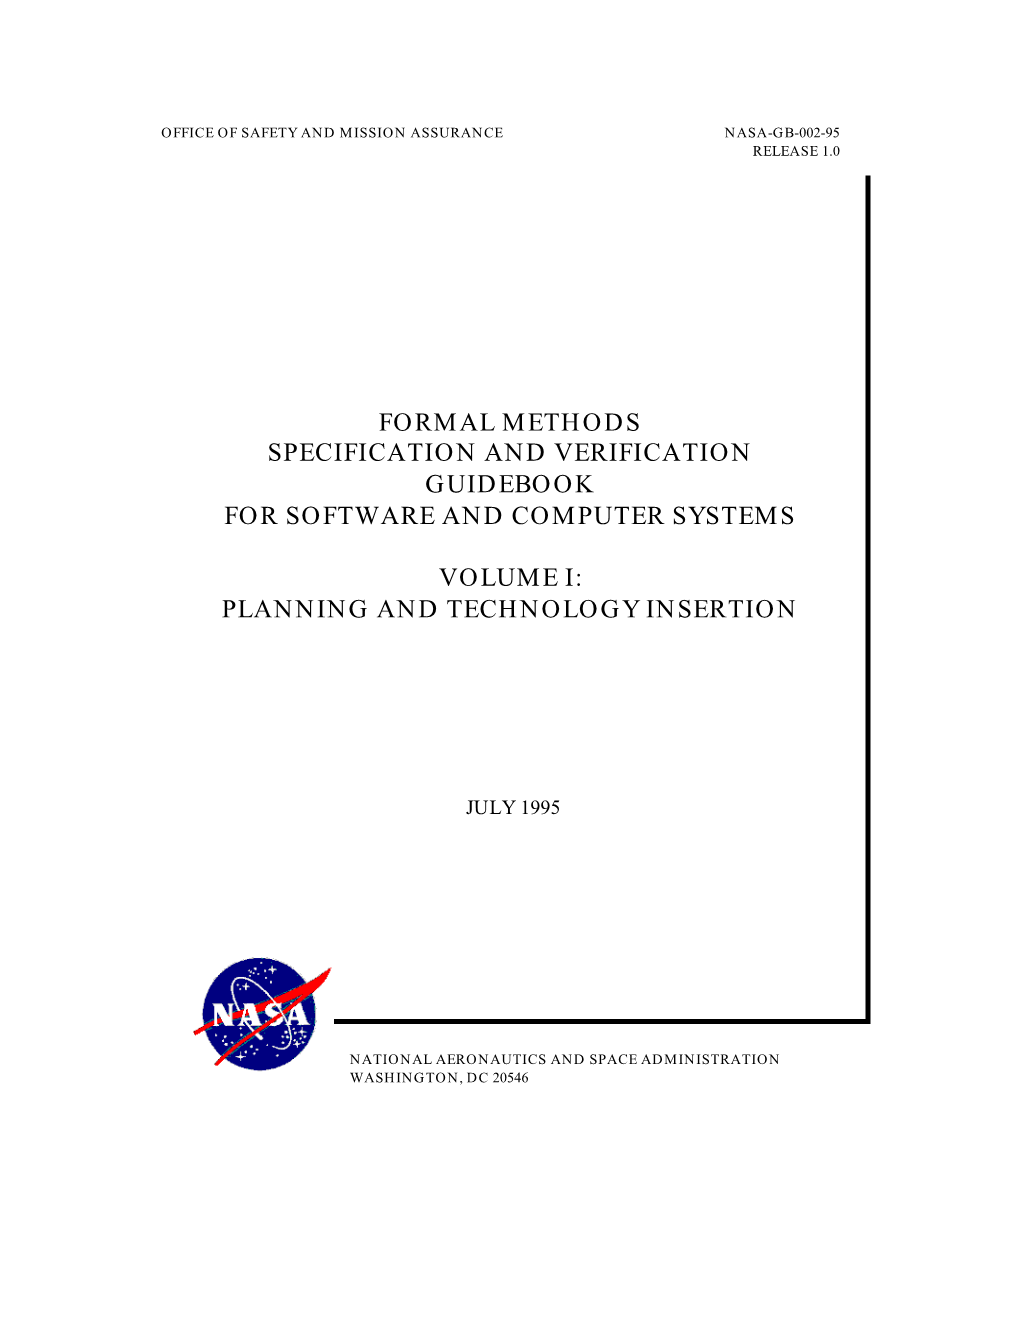 Formal Methods Specification and Verification Guidebook for Software and Computer Systems Volume I: Planning and Technology Insertion